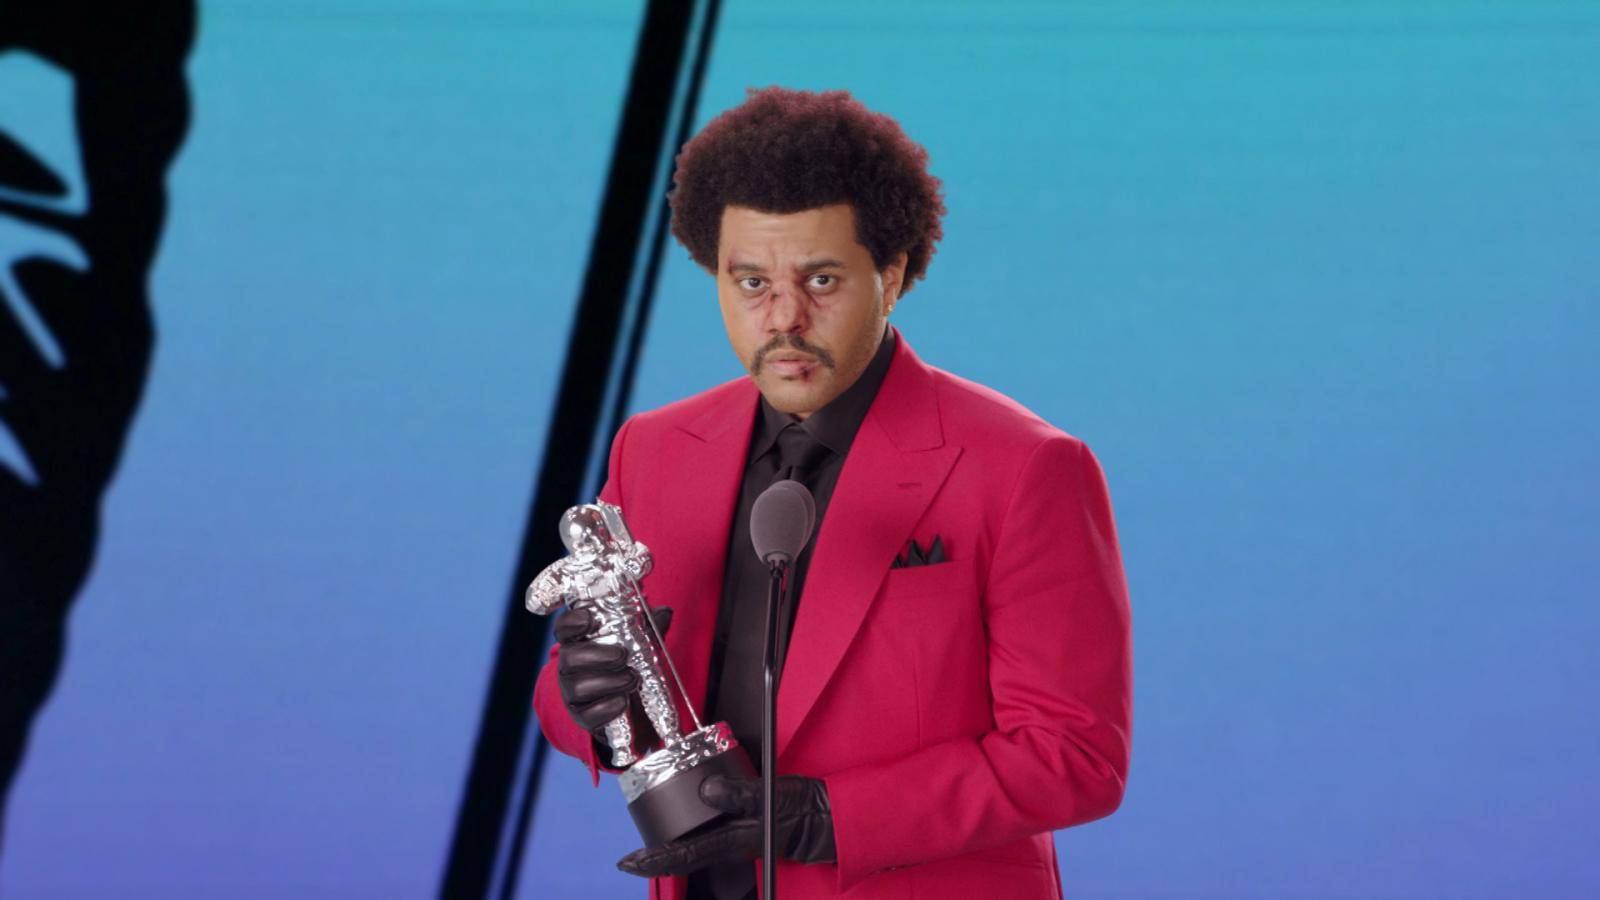 The Weeknd accepts the award for Best R&B during the 2020 MTV VMAs